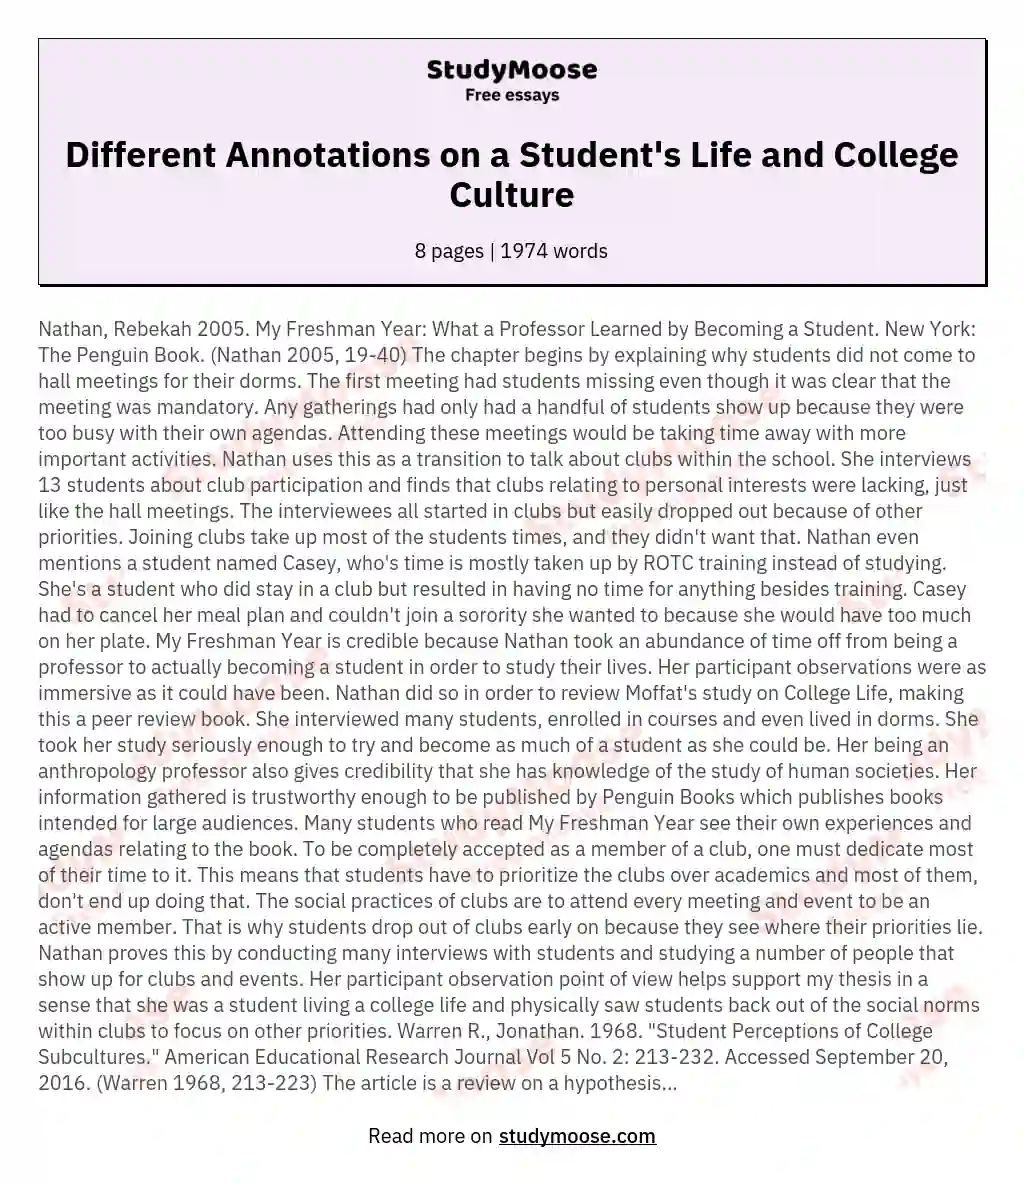 Different Annotations on a Student's Life and College Culture